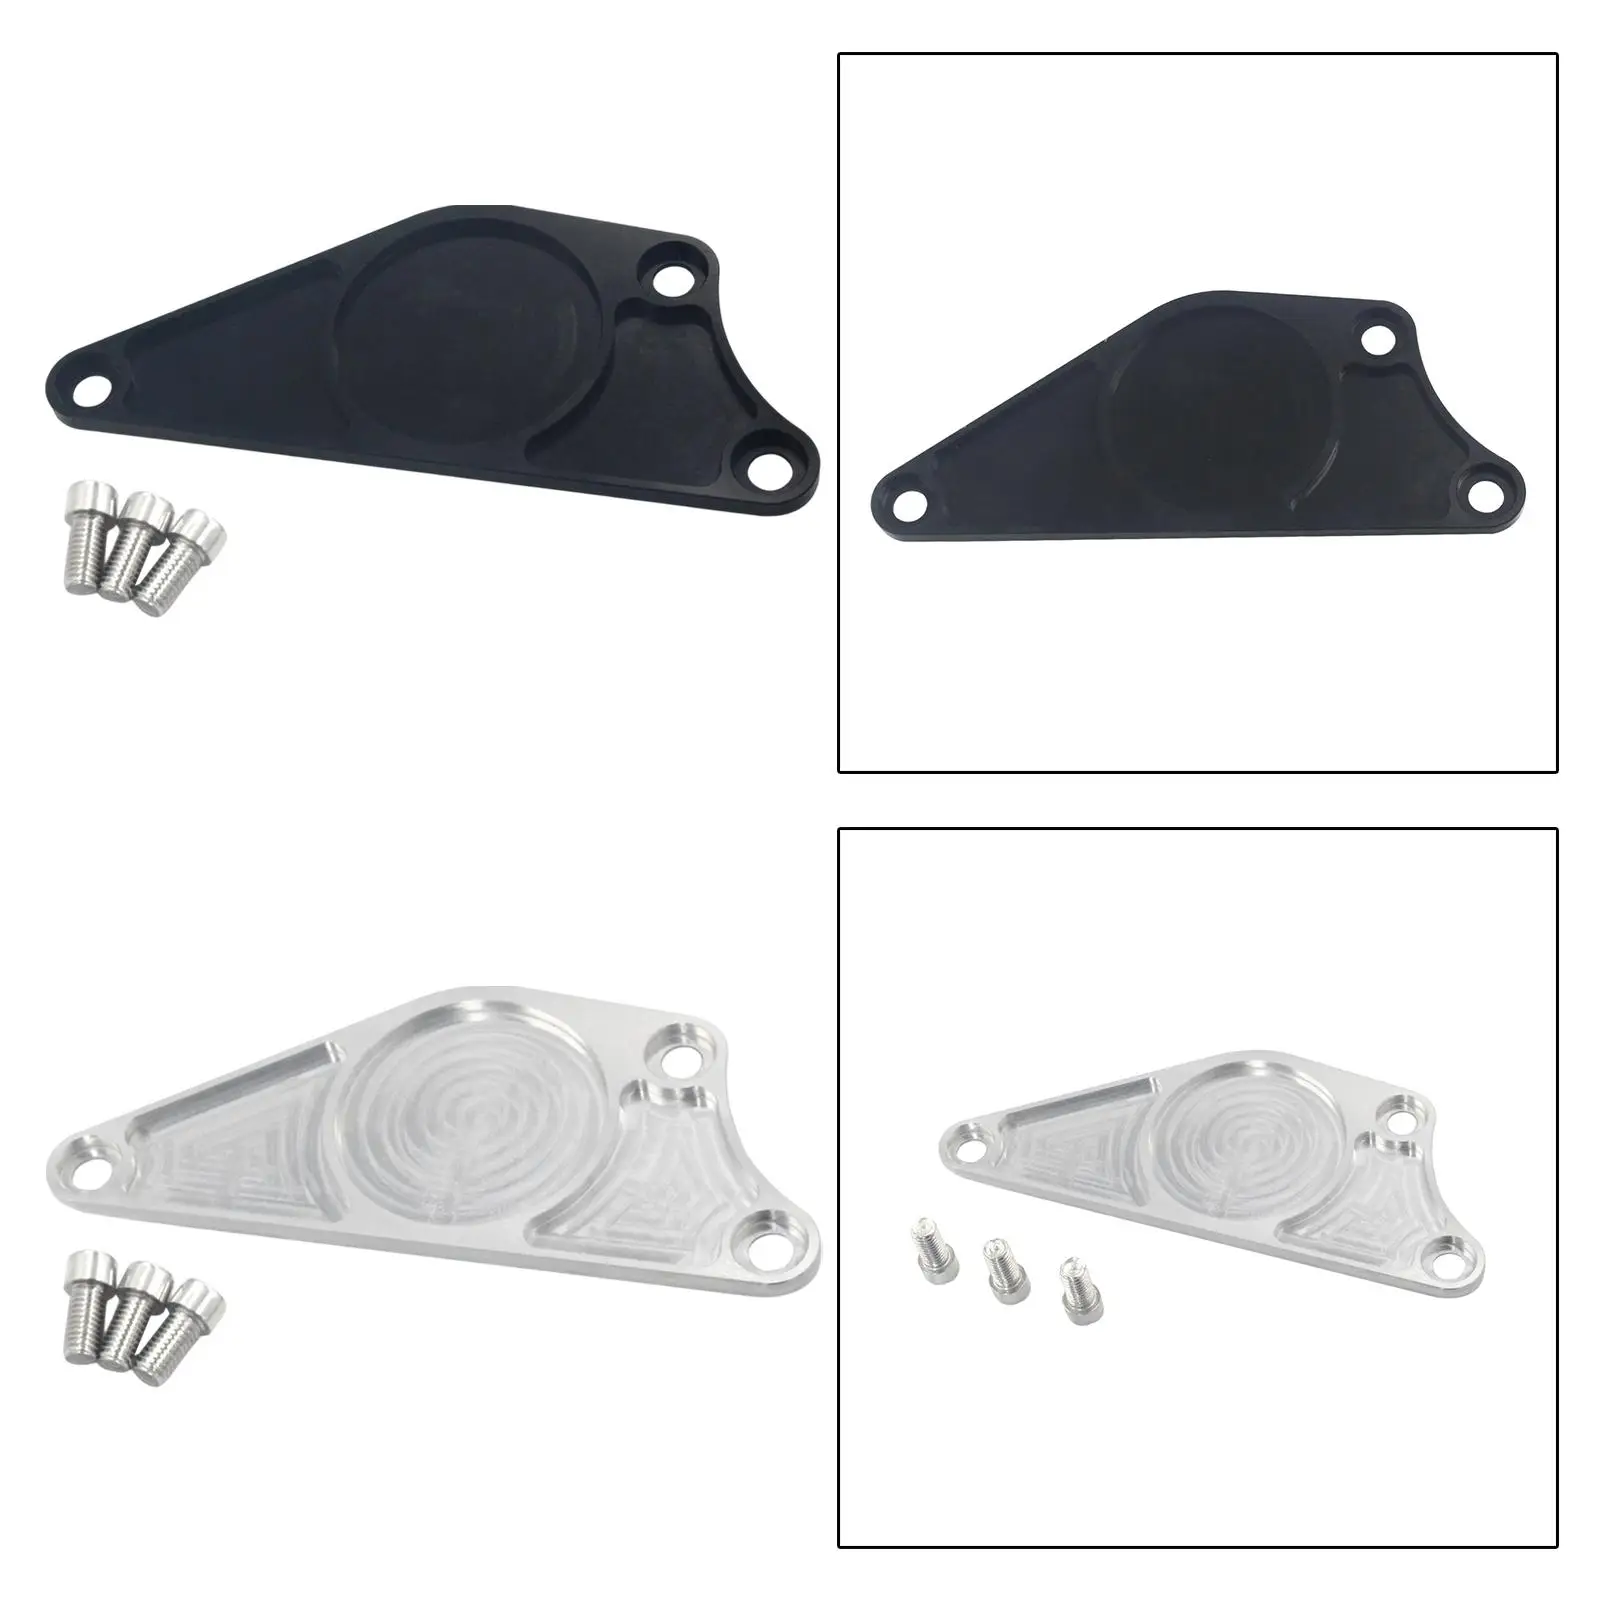 Billet cam Plate Auto Parts Aluminum Alloy Durable Easy to Install for Scion FRS 2013+ Fits Adapter Accessories Camshaft Plate